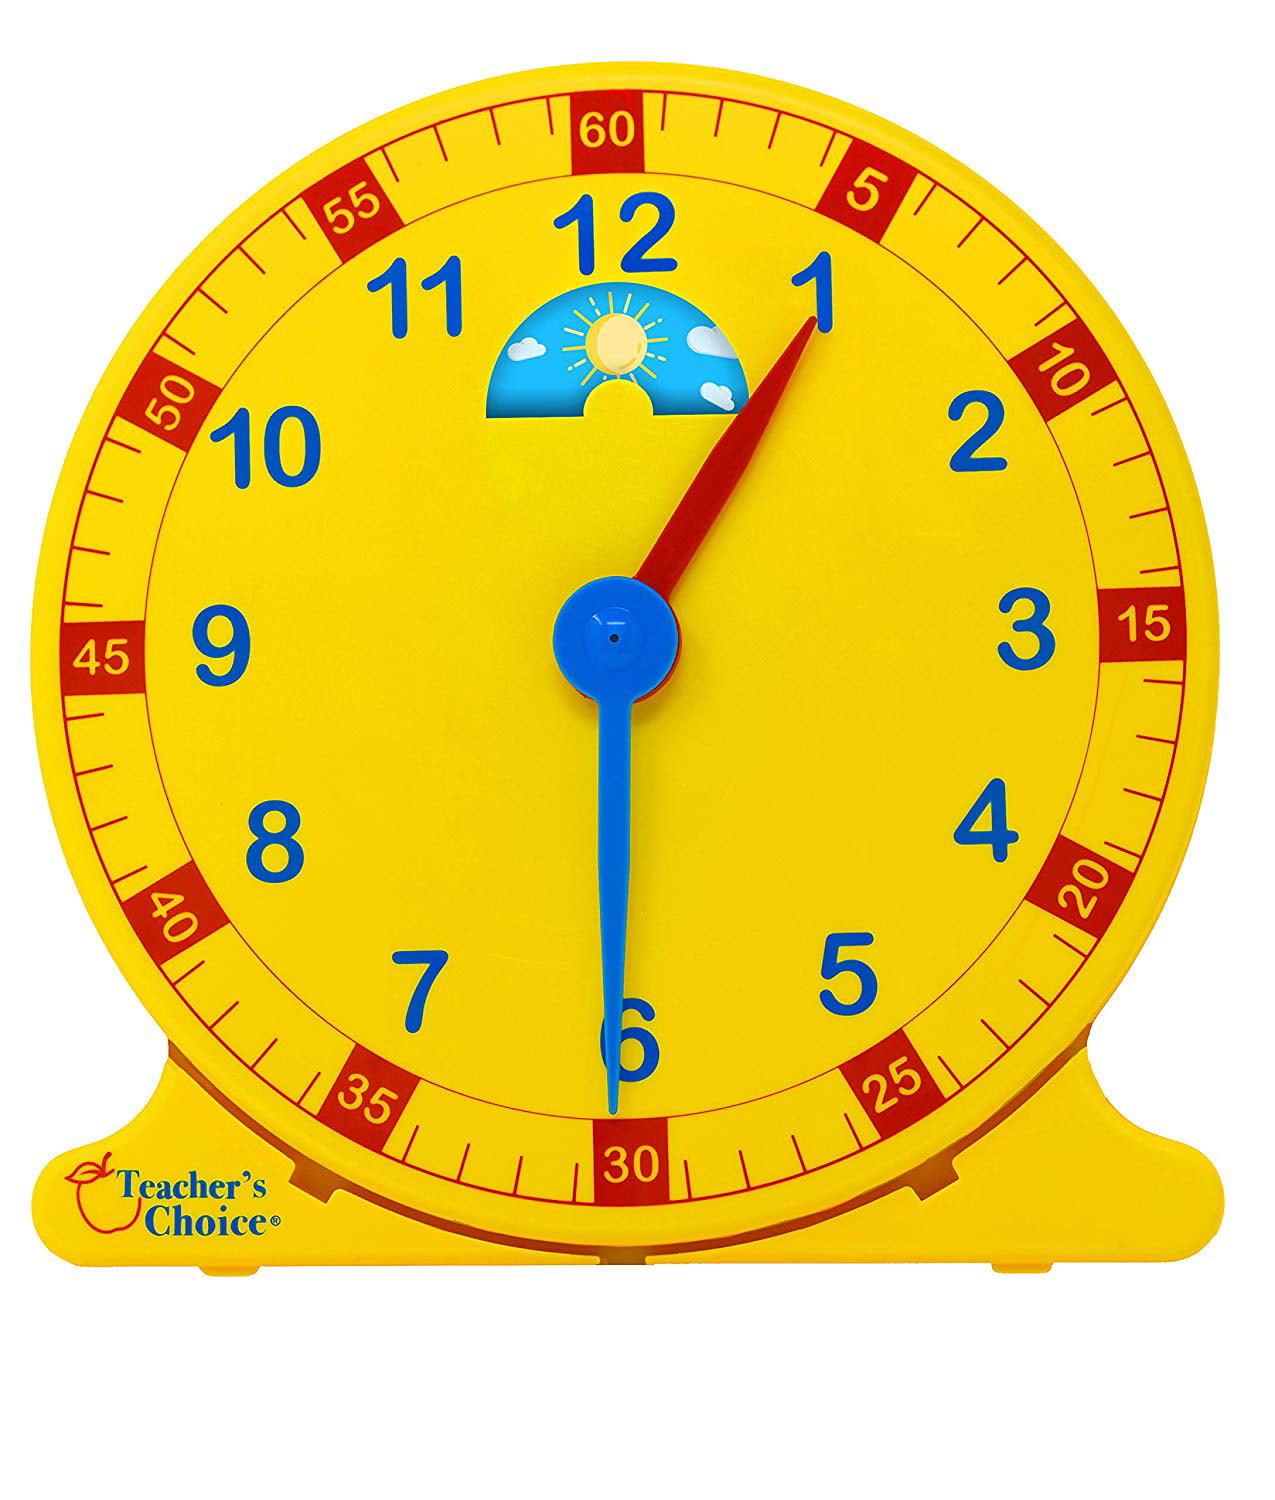 learn-how-to-tell-time-teaching-clock-large-12-classroom-demonstration-night-and-day-learning